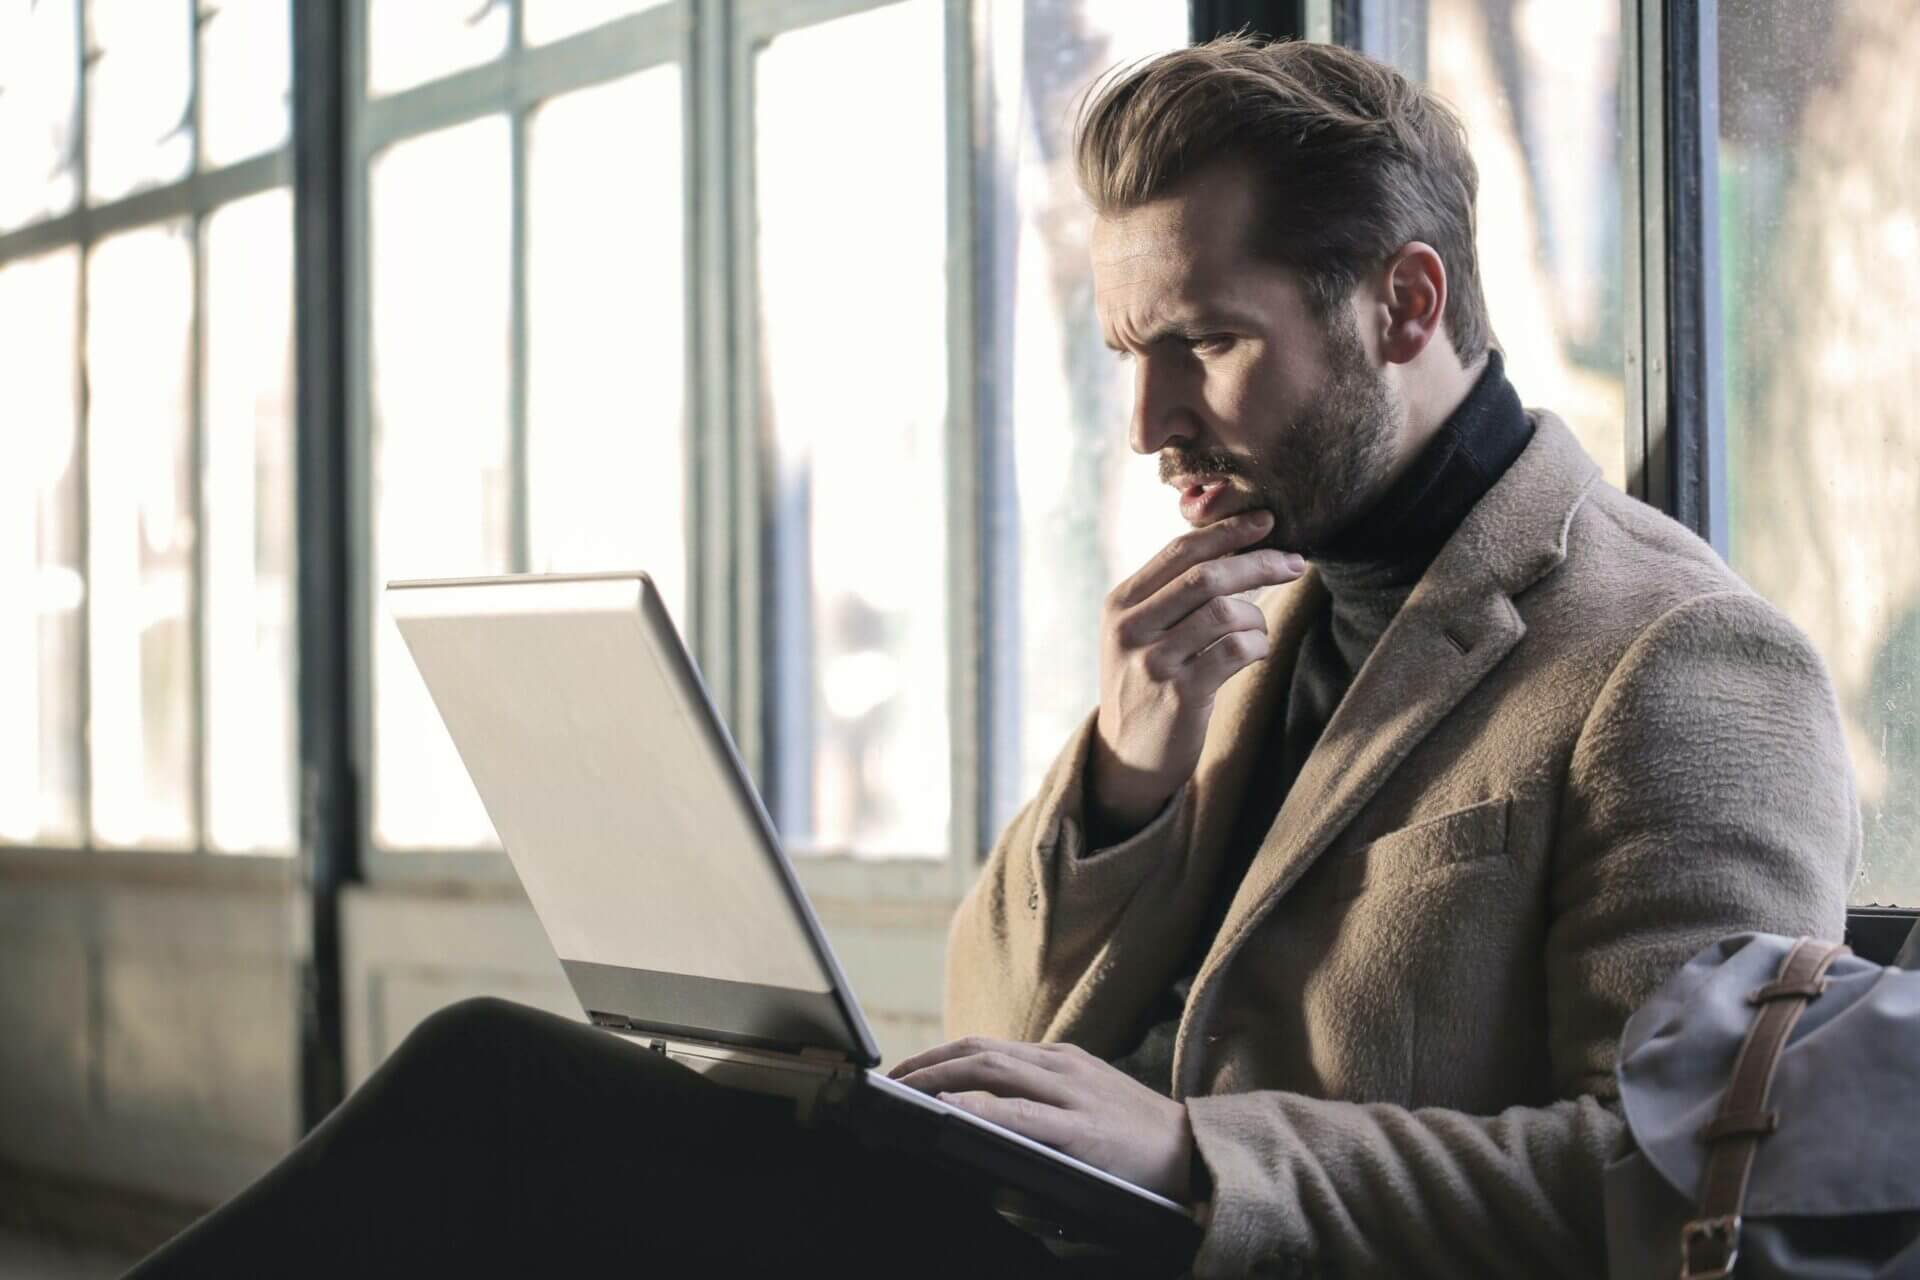 A man sitting wearing an overcoat looking at his laptop.